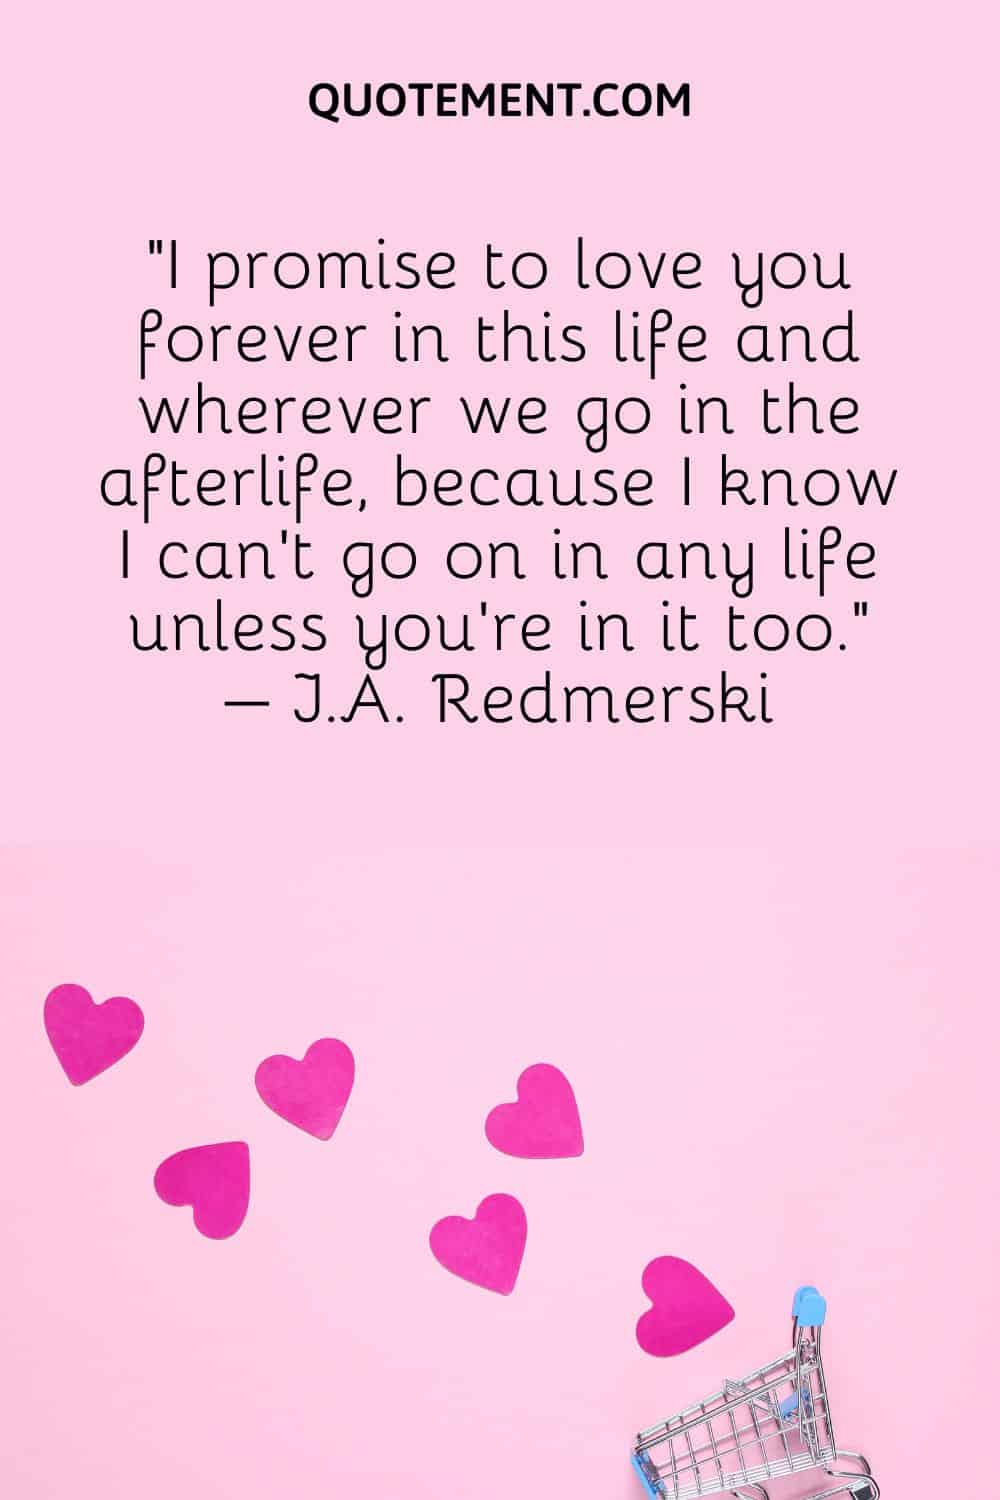 “I promise to love you forever in this life and wherever we go in the afterlife, because I know I can’t go on in any life unless you’re in it too.” – J.A. Redmerski